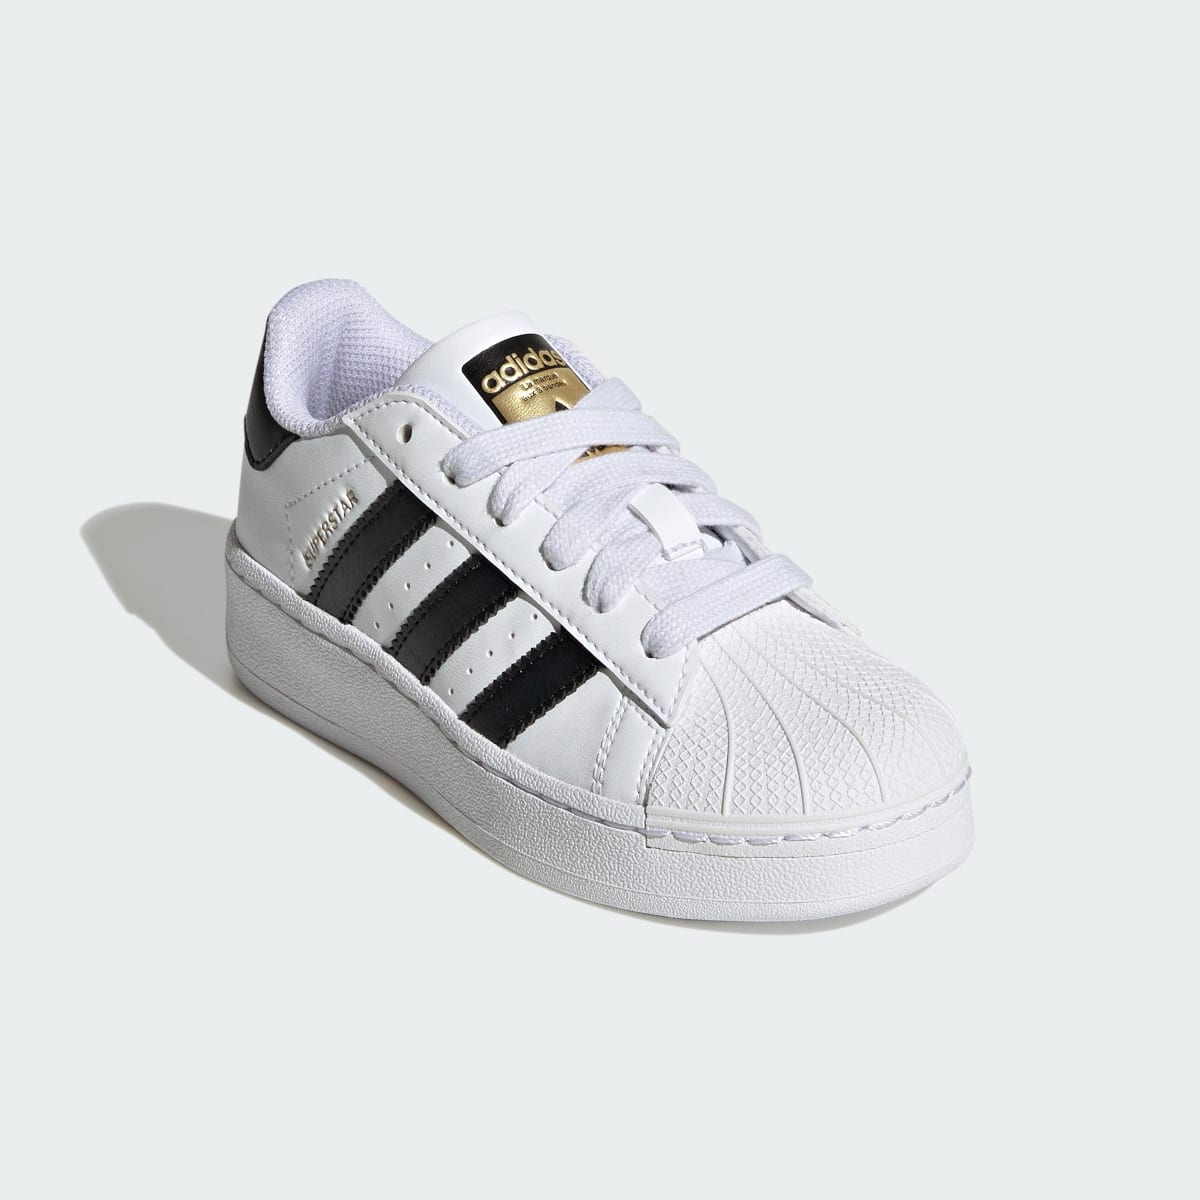 Adidas Superstar XLG Shoes Kids. 5